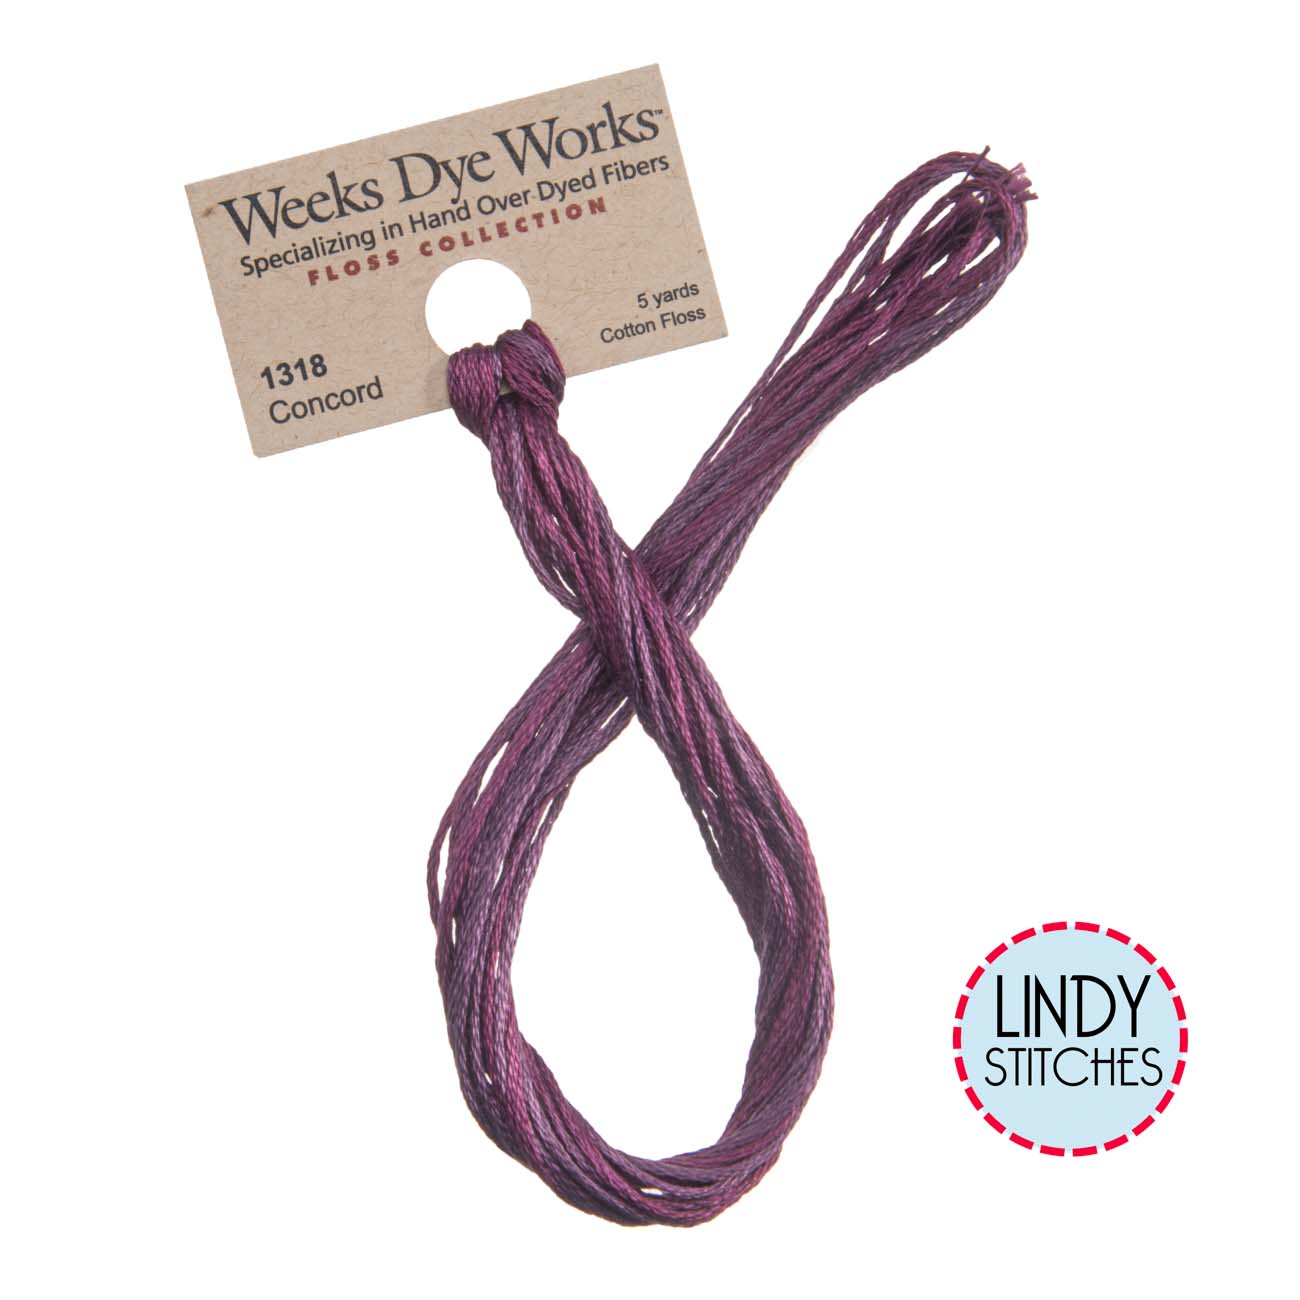 Concord Weeks Dye Works Floss Hand Dyed Cotton Skein 1318